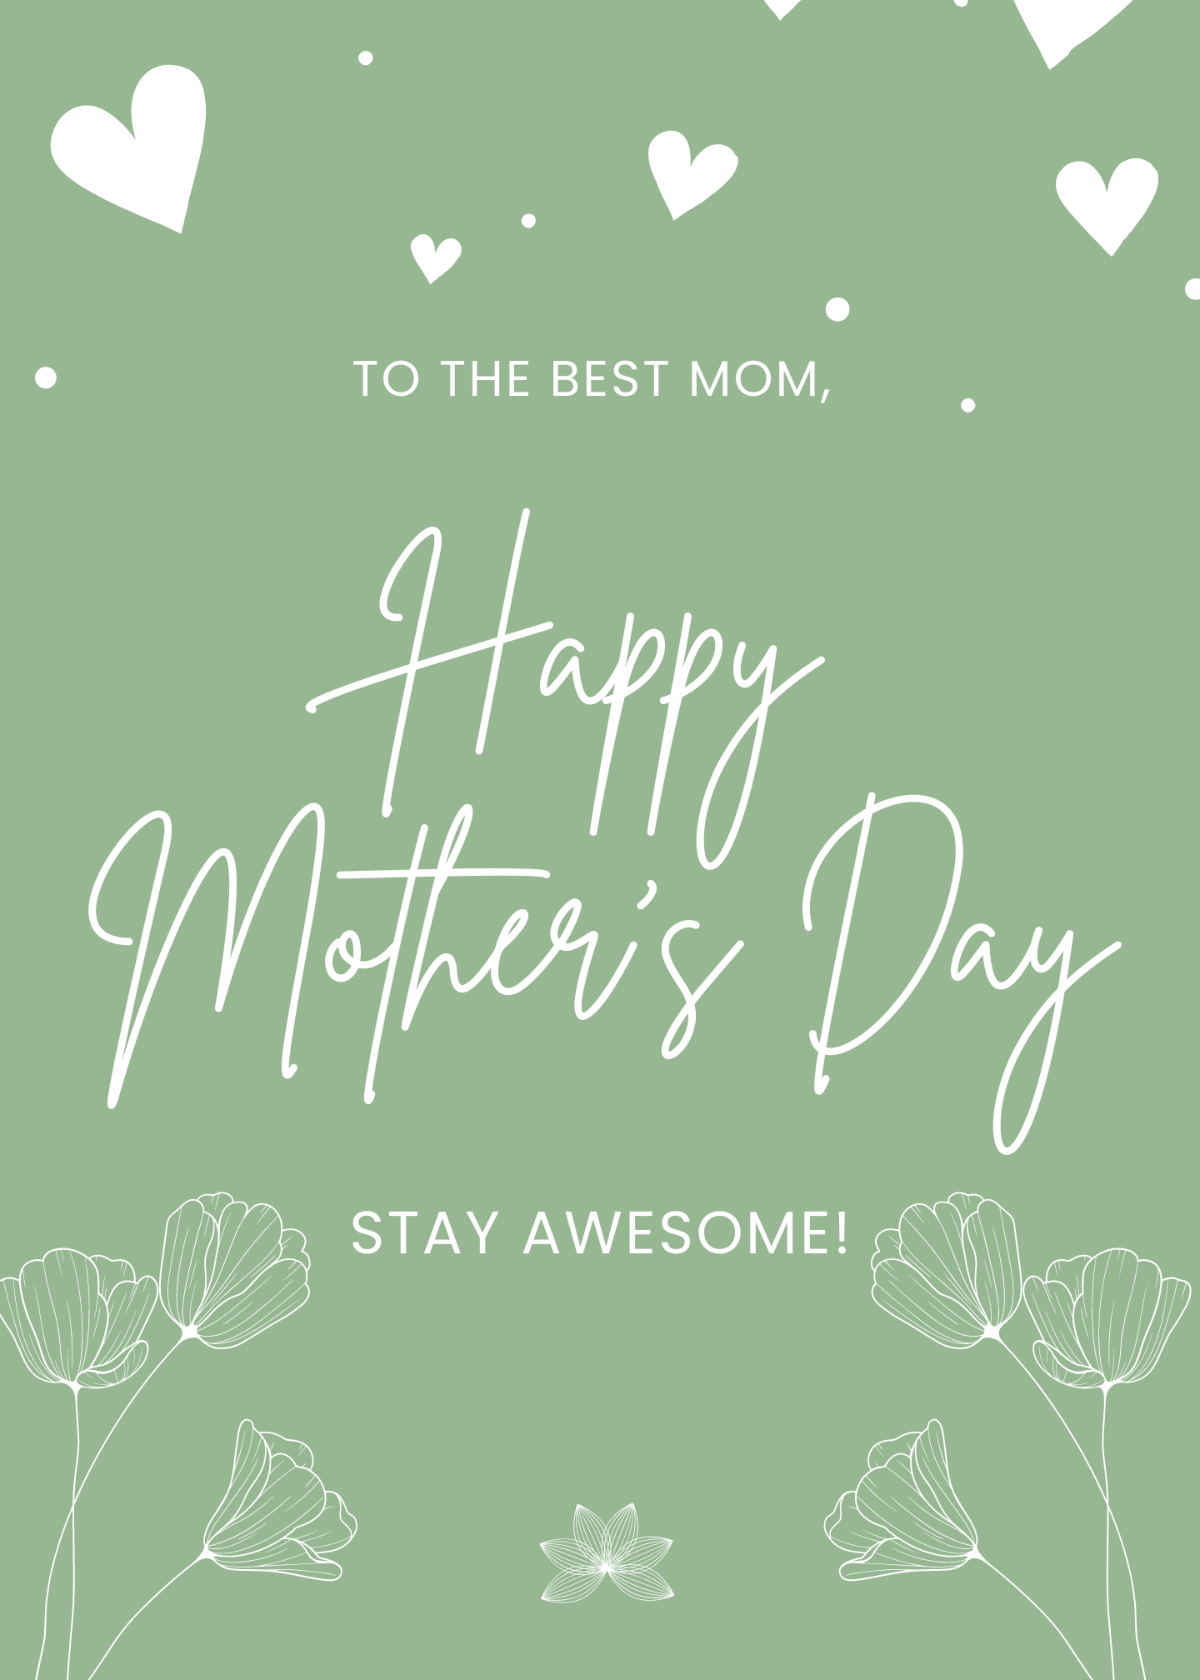 Vintage Mother's Day Card Template